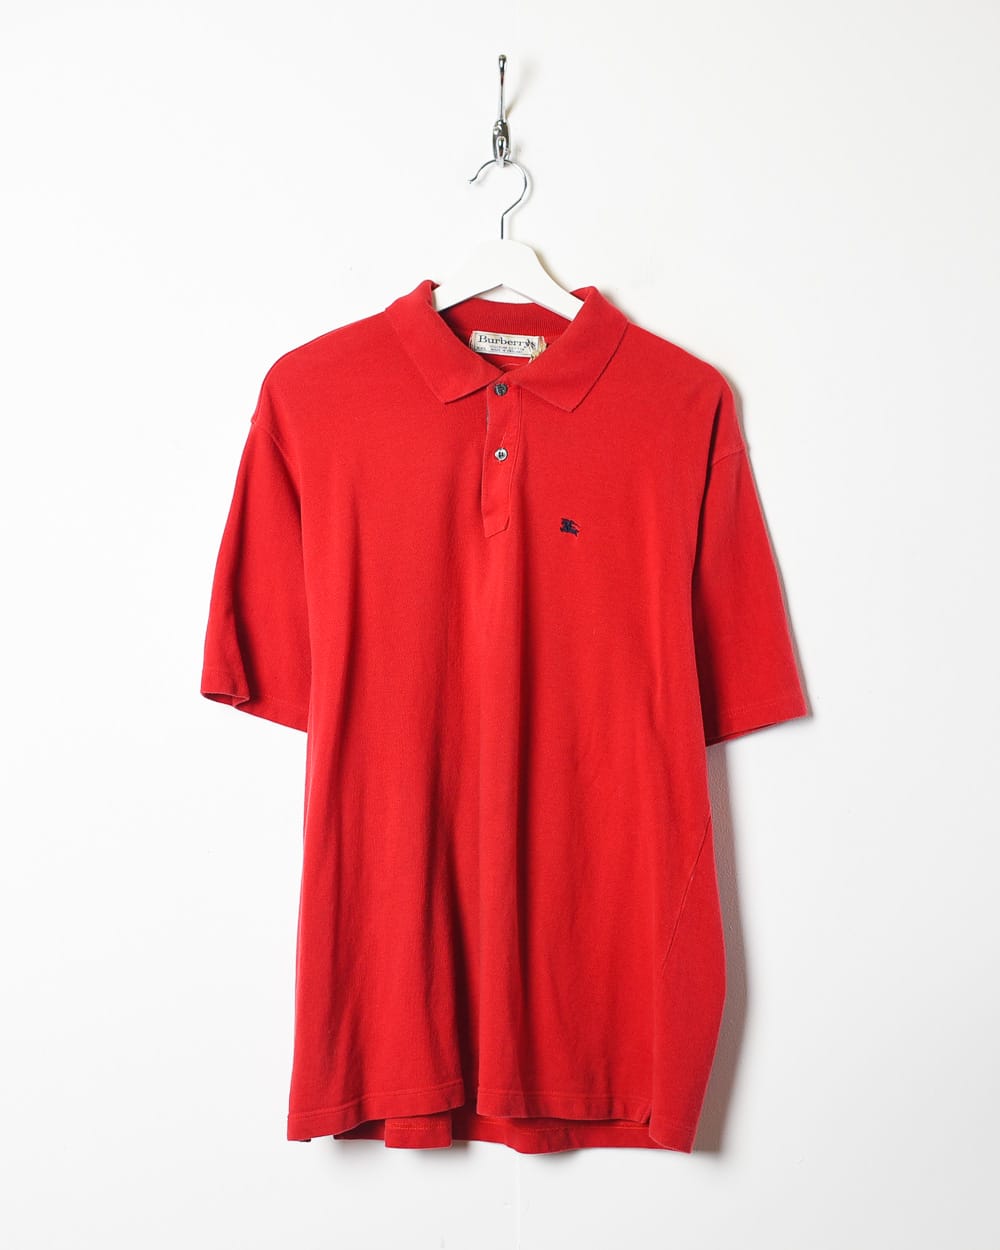 Red Burberrys Polo Shirt - X-Large